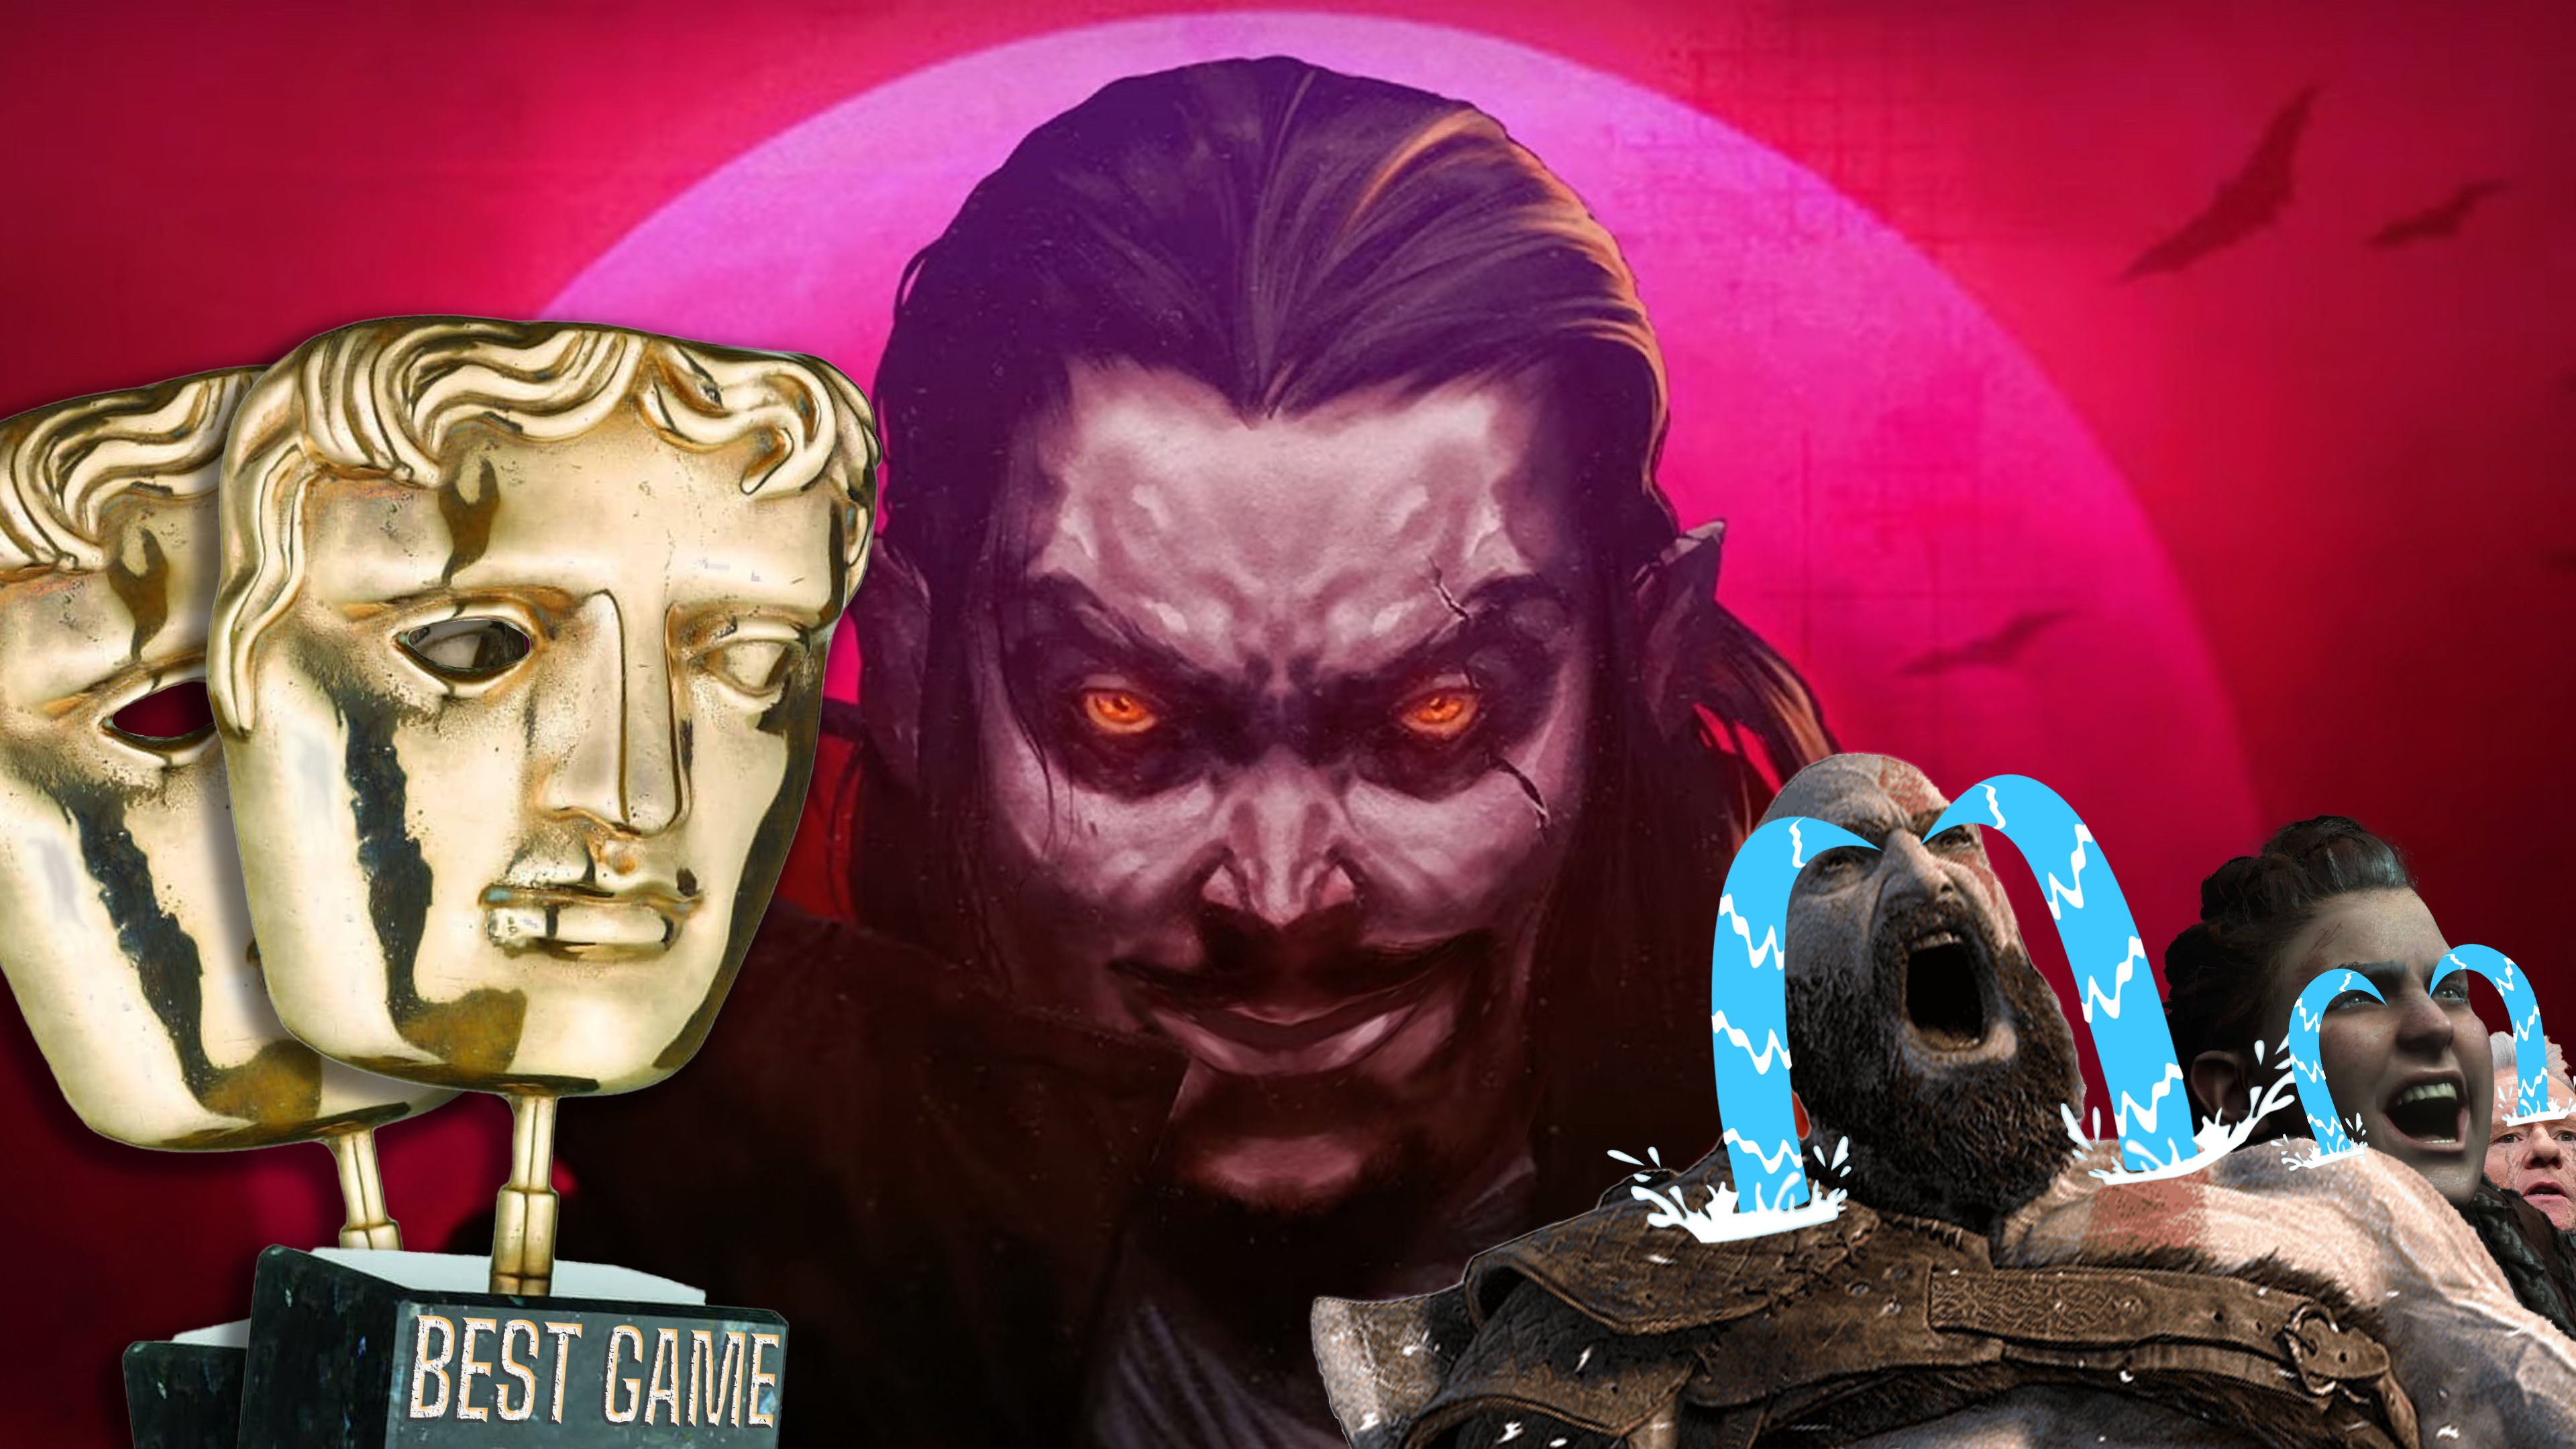 Image for Vampire Survivors absolutely deserved to win Best Game at the BAFTAs